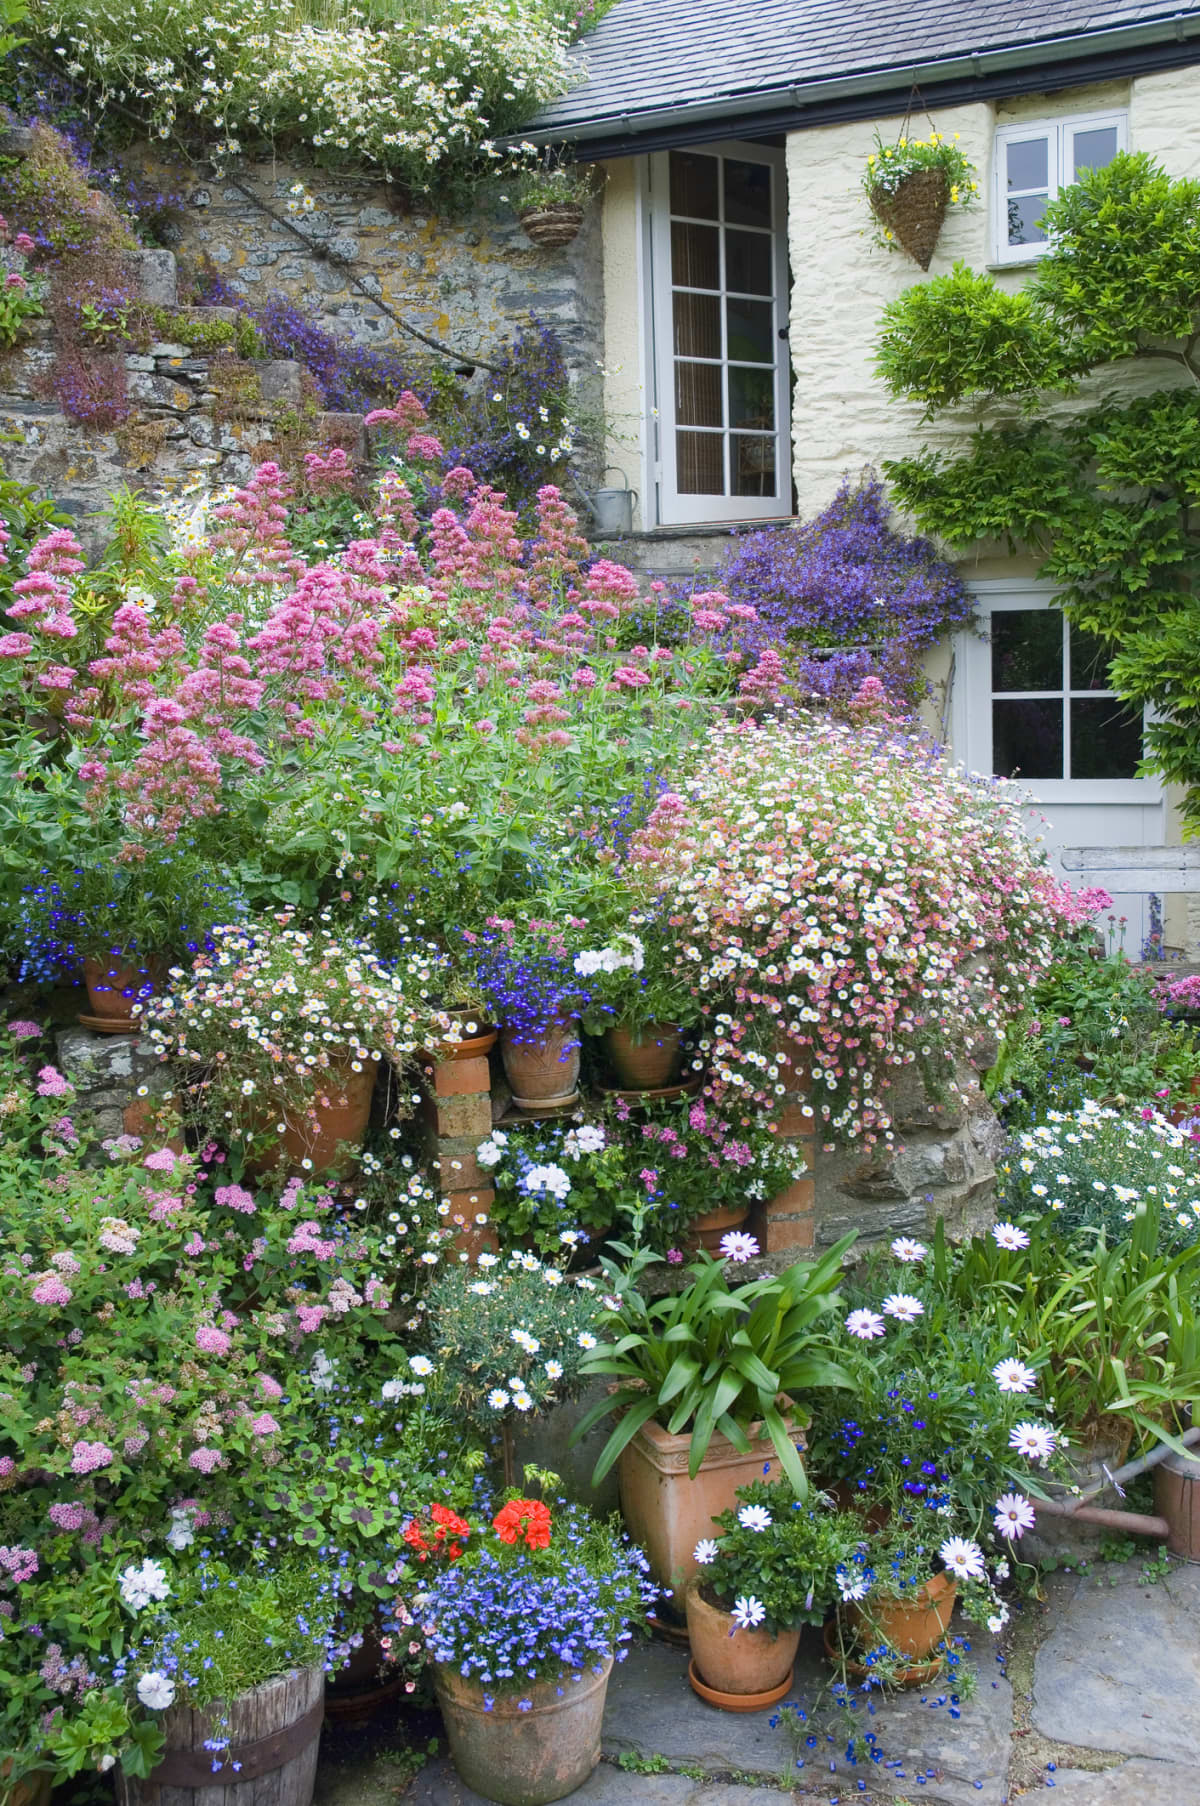 A colorful yard with flowers in a garden